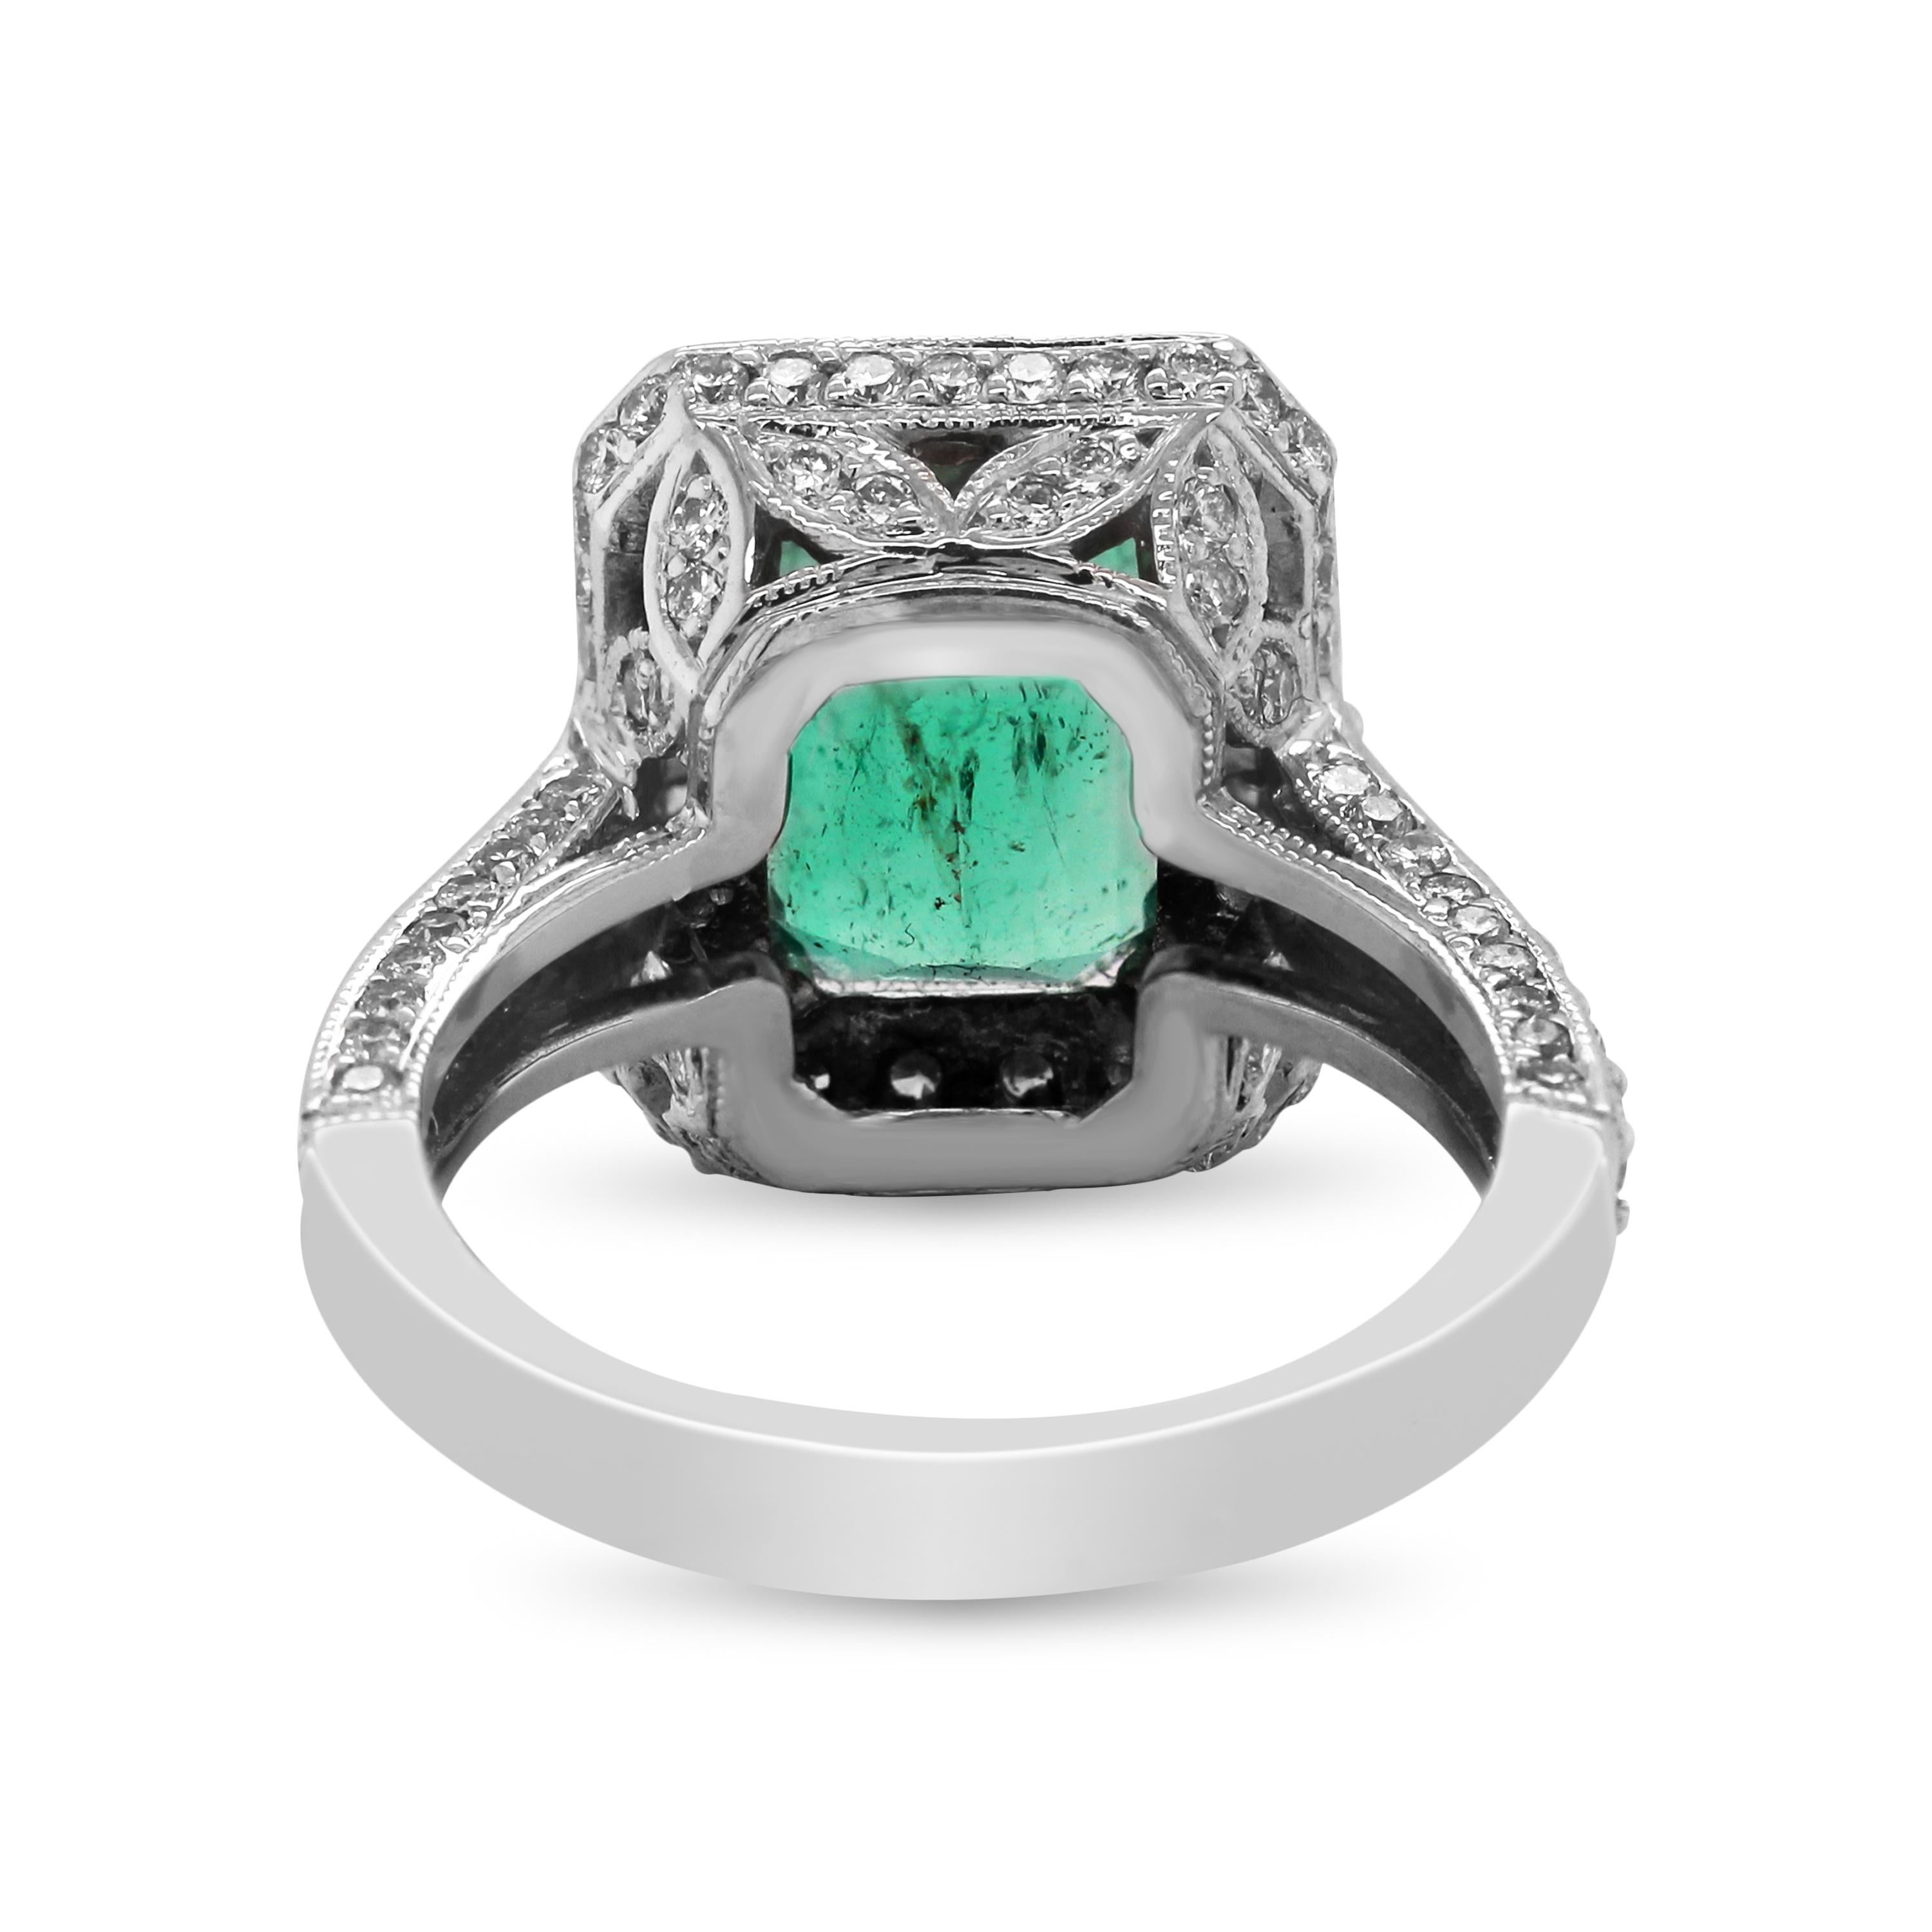 3.37 Carat Emerald 14 Karat White Gold Diamond Cocktail Ring In Excellent Condition For Sale In Boca Raton, FL